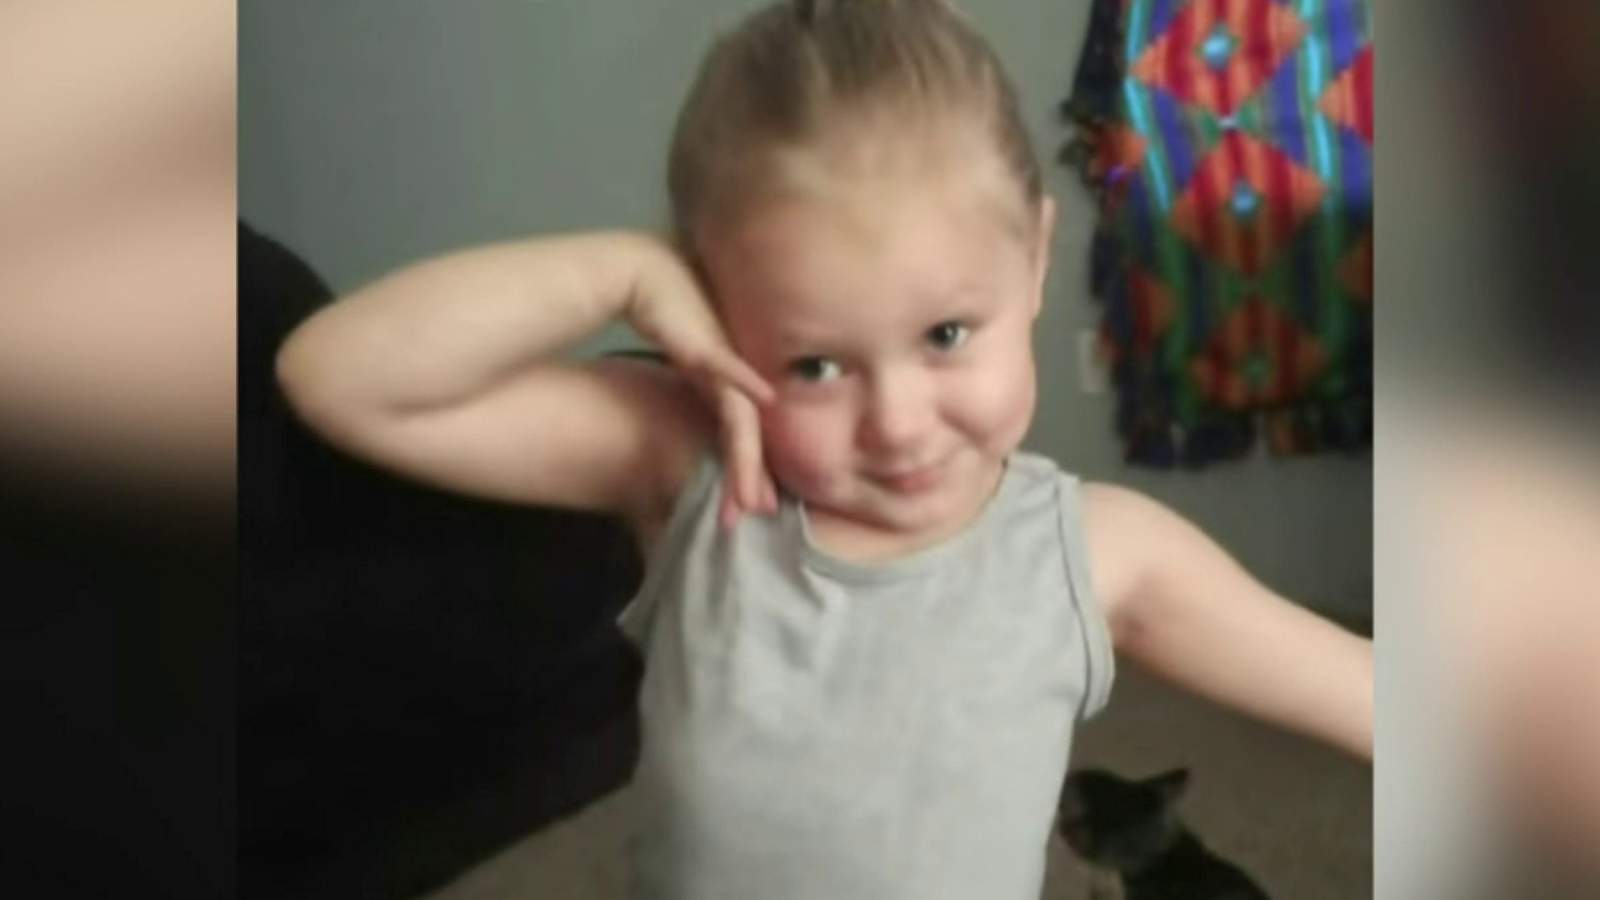 Family says Child Protective Services had been called prior to death of 3-year-old Holly Township girl